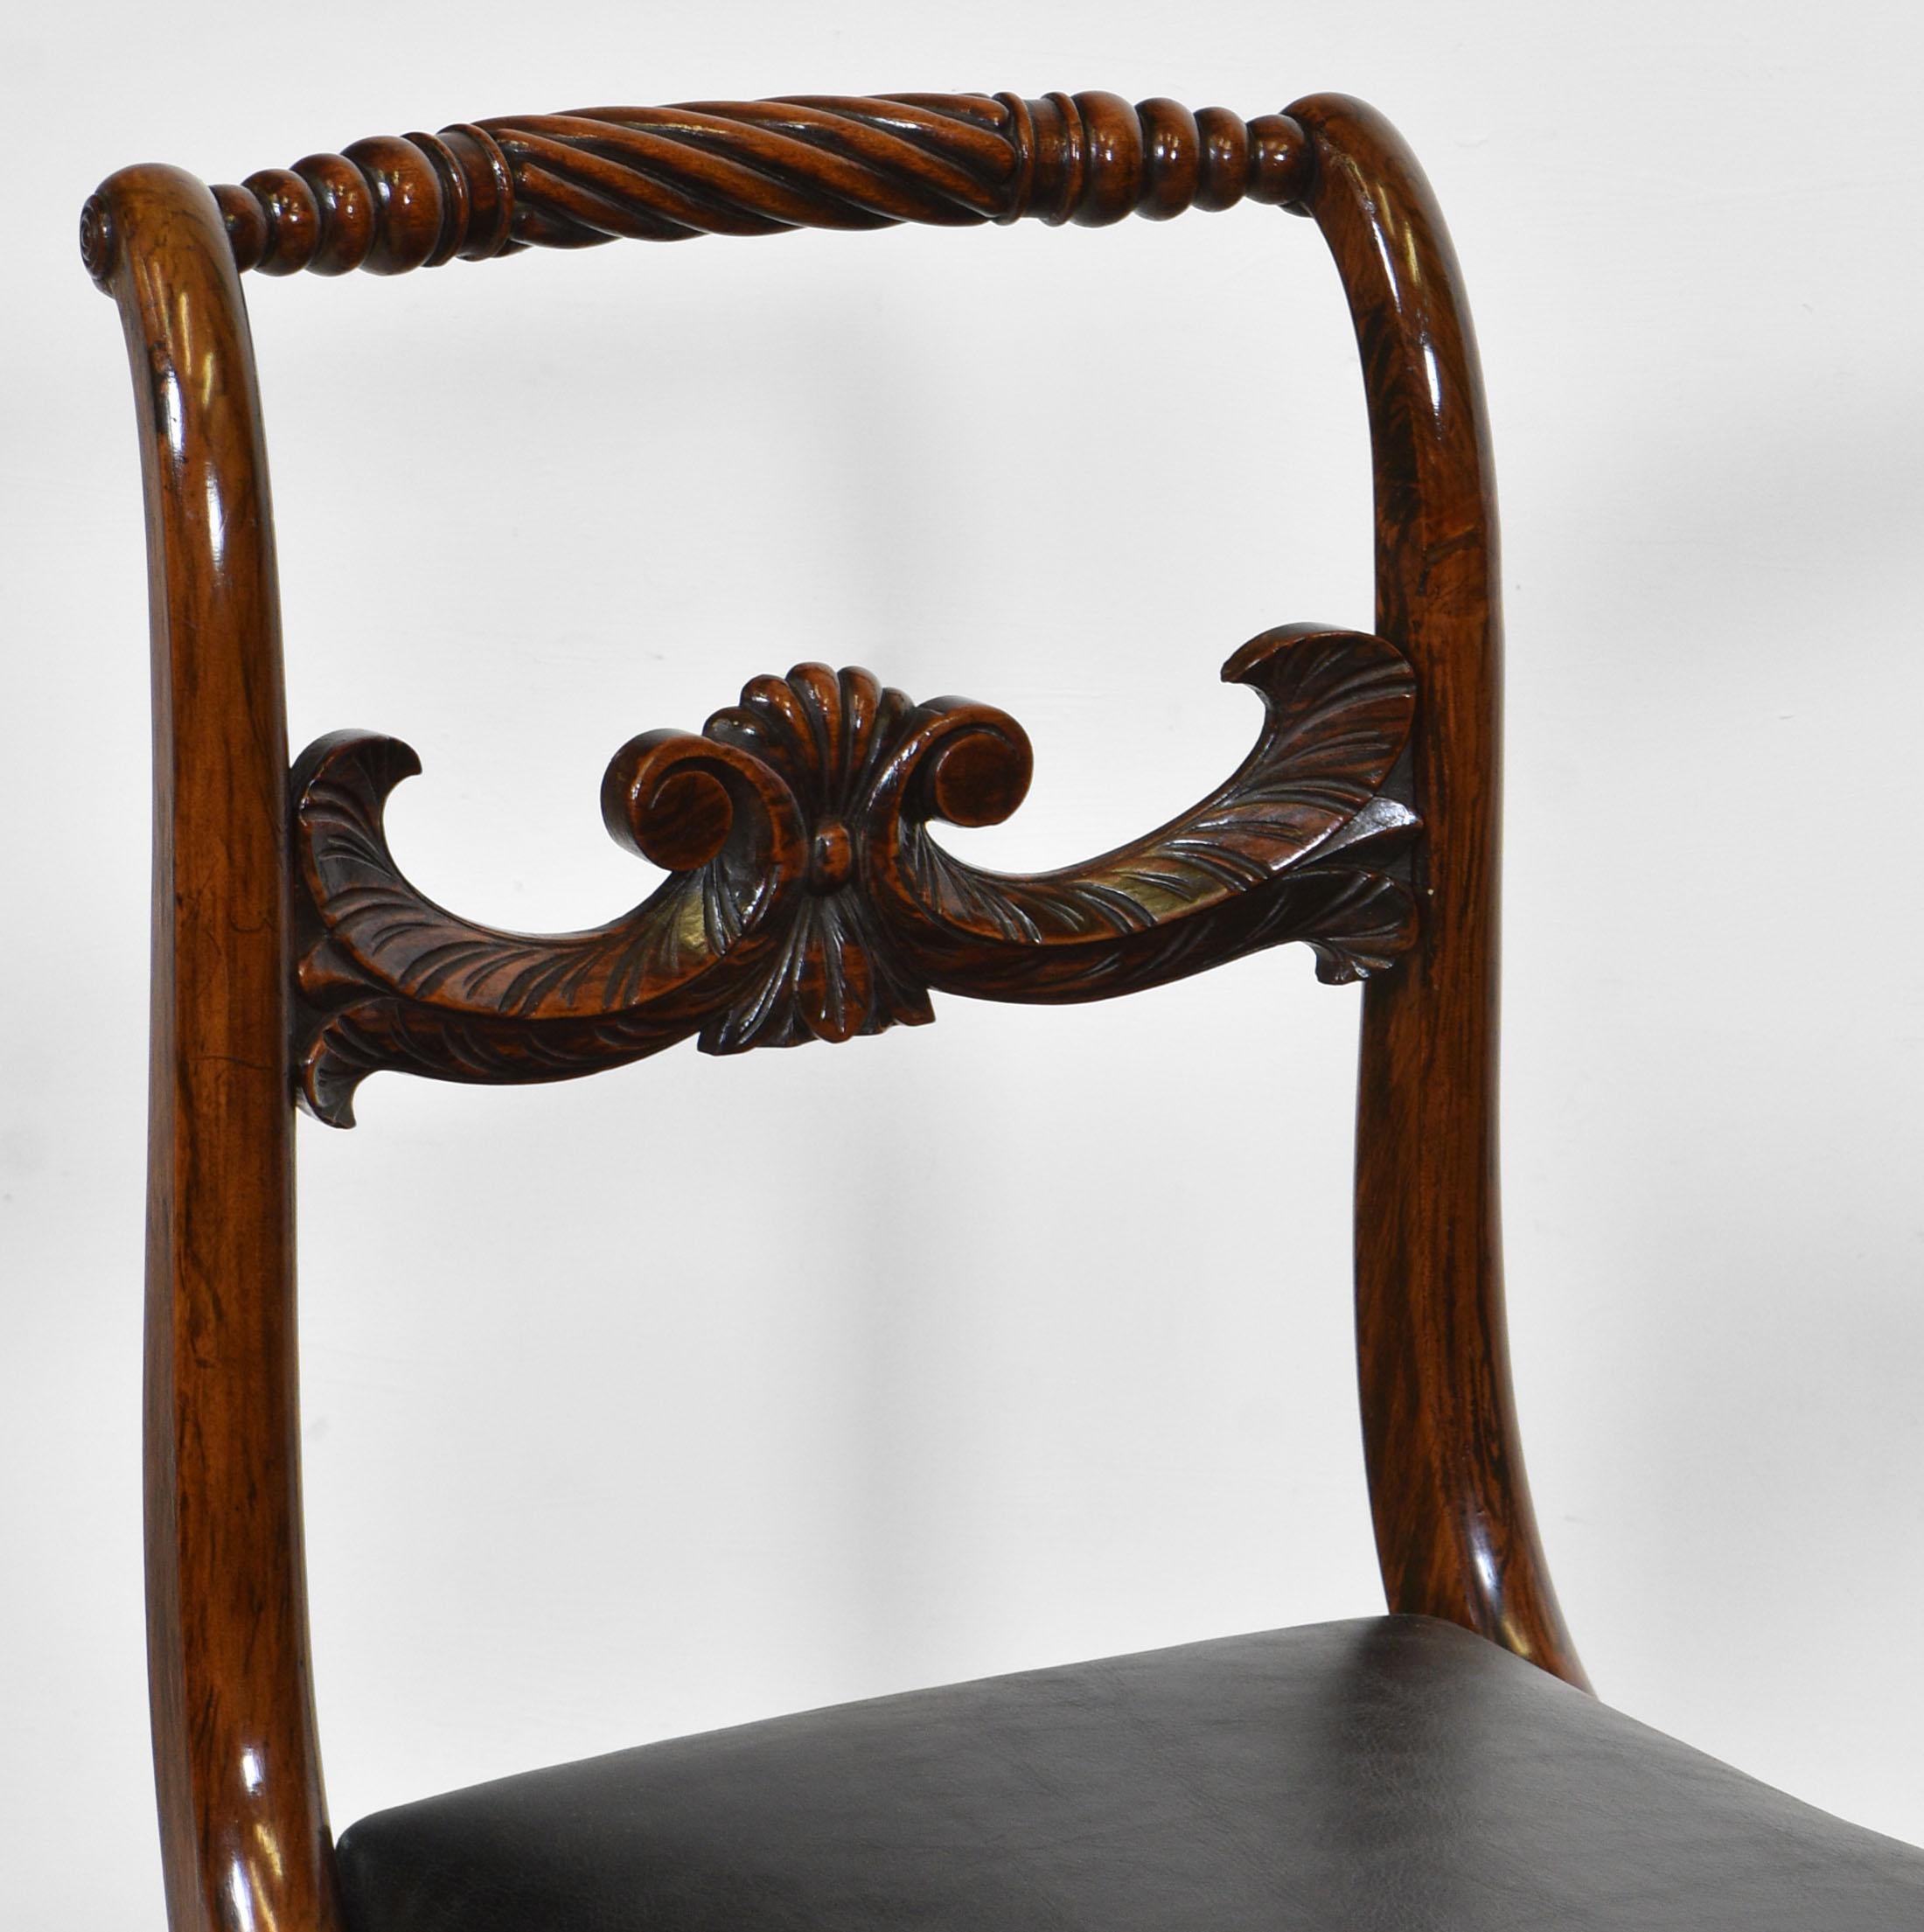 A pair of Regency scroll back chairs in simulated rosewood and black leather inset seats. Circa 1820.

The chairs have a rope twist turned top rail, with a carved central rail, and terminate on sabre front legs. National pride in the British naval